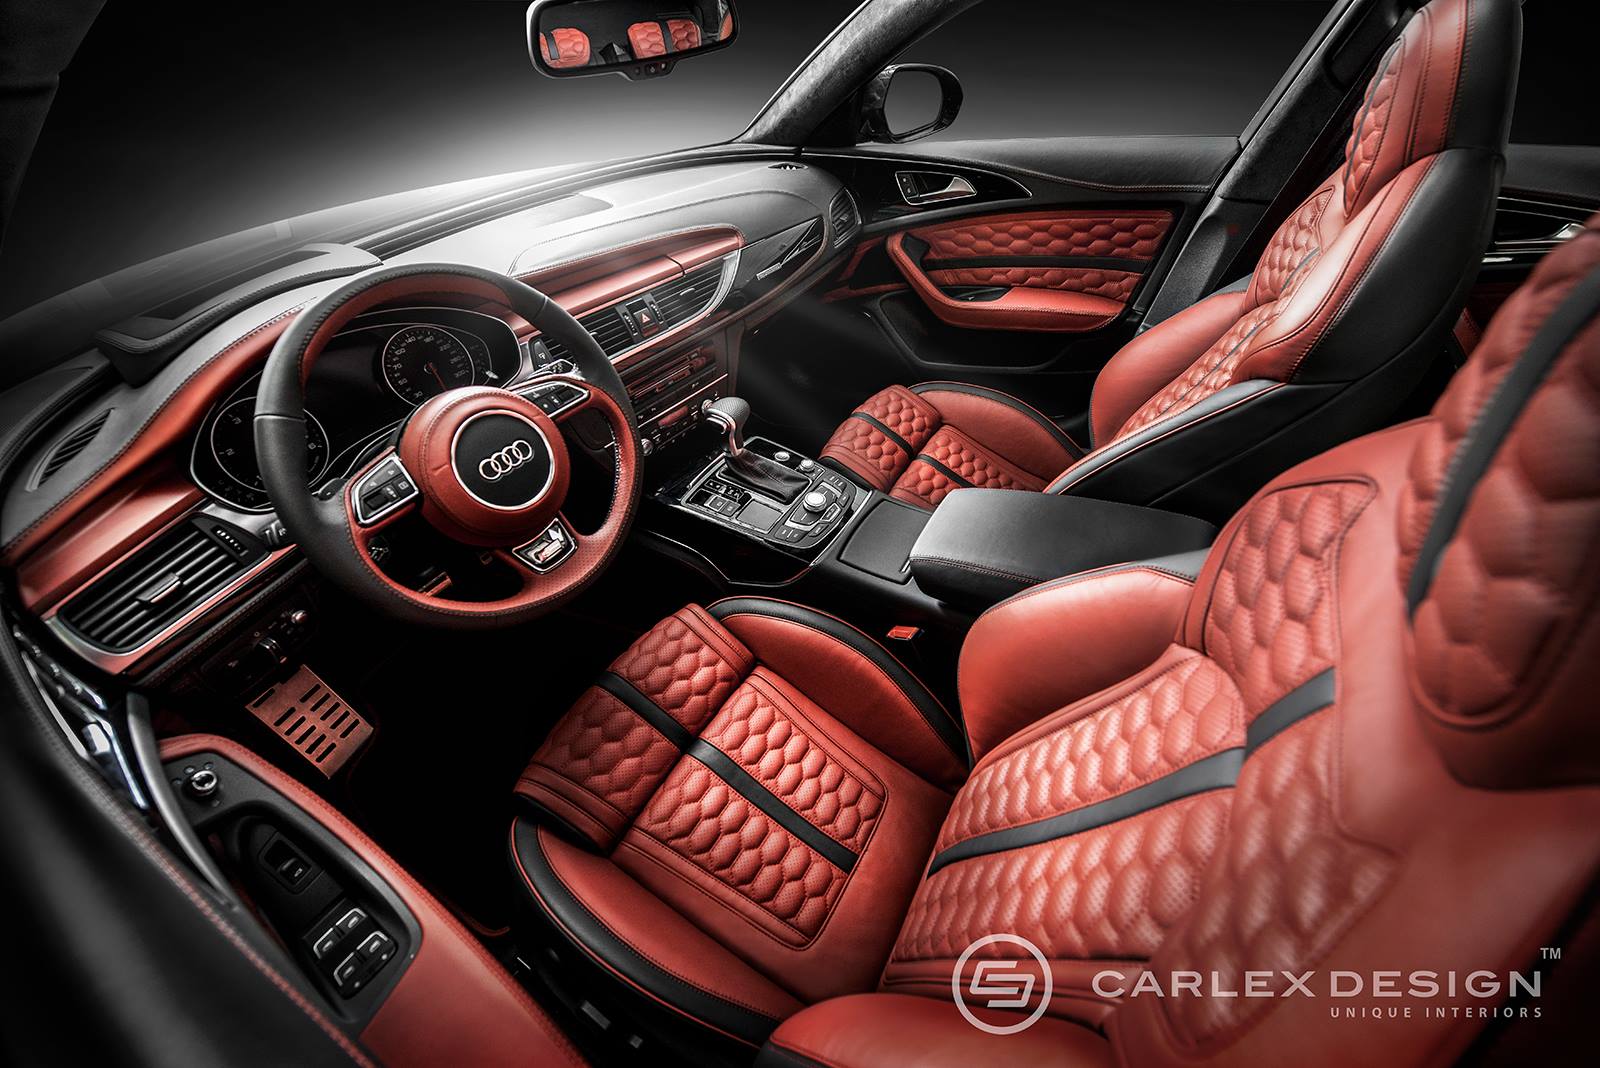 inspiration for a custom car interior can come from all sorts of 